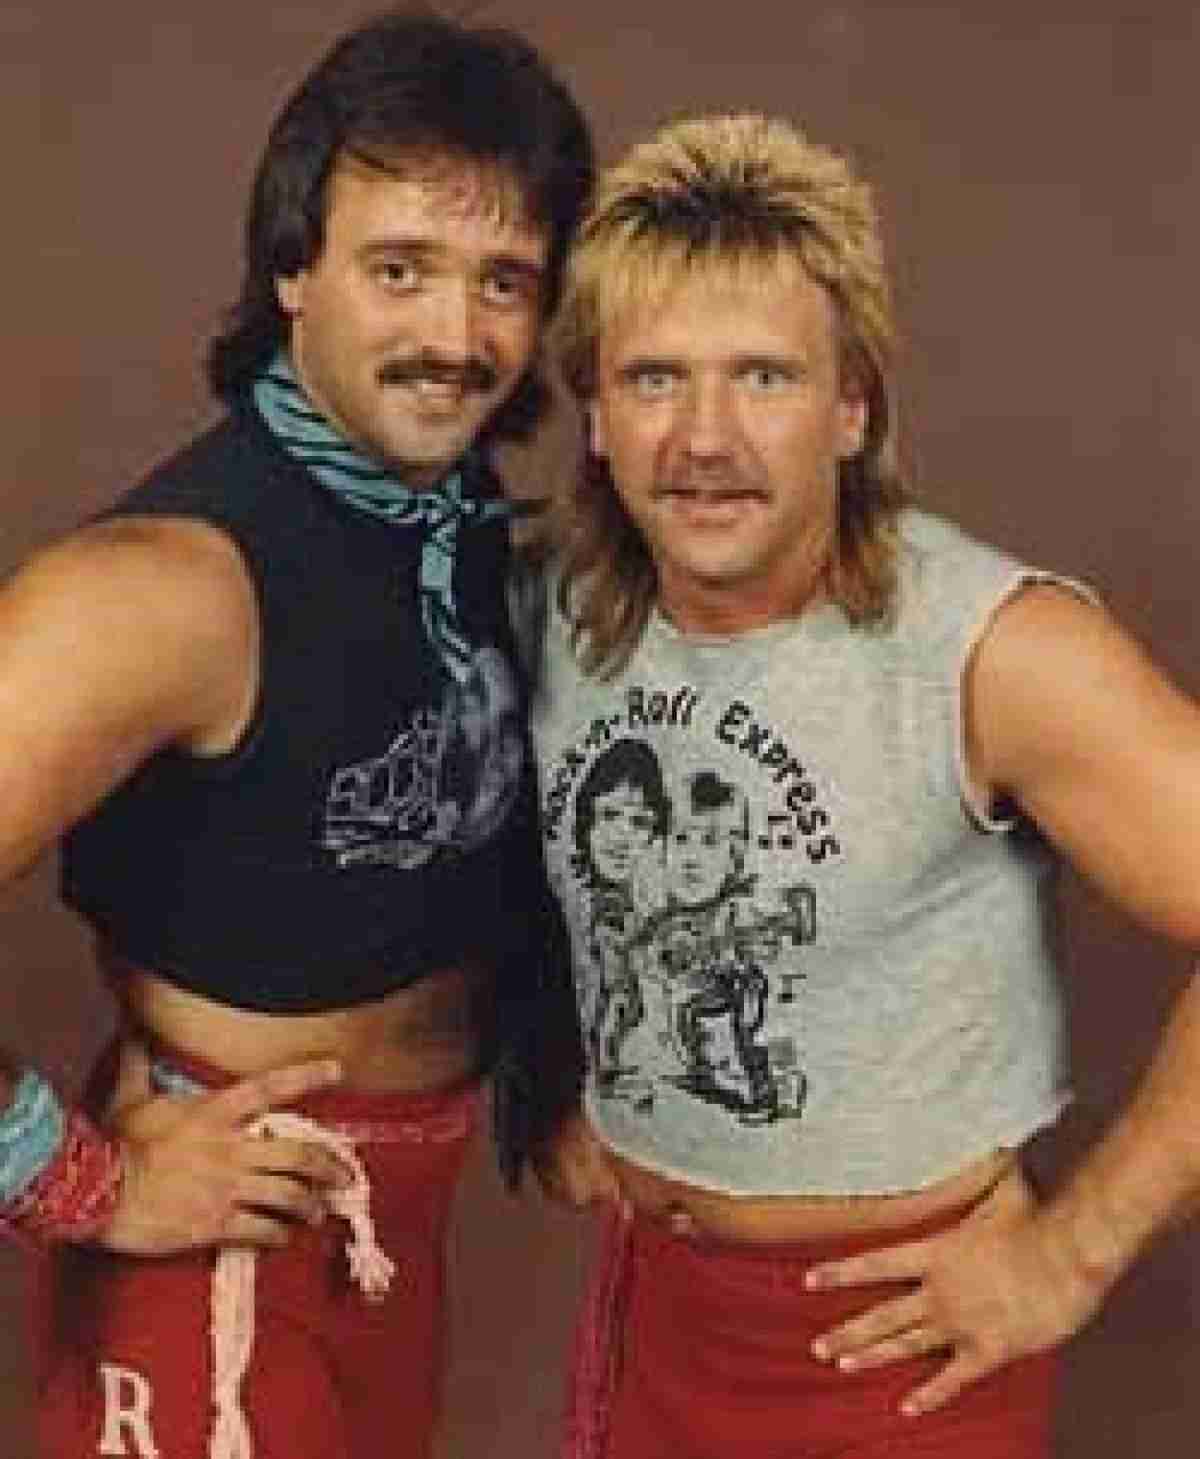 Not in Hall of Fame - The Rock and Roll Express headed to the WWEHOF